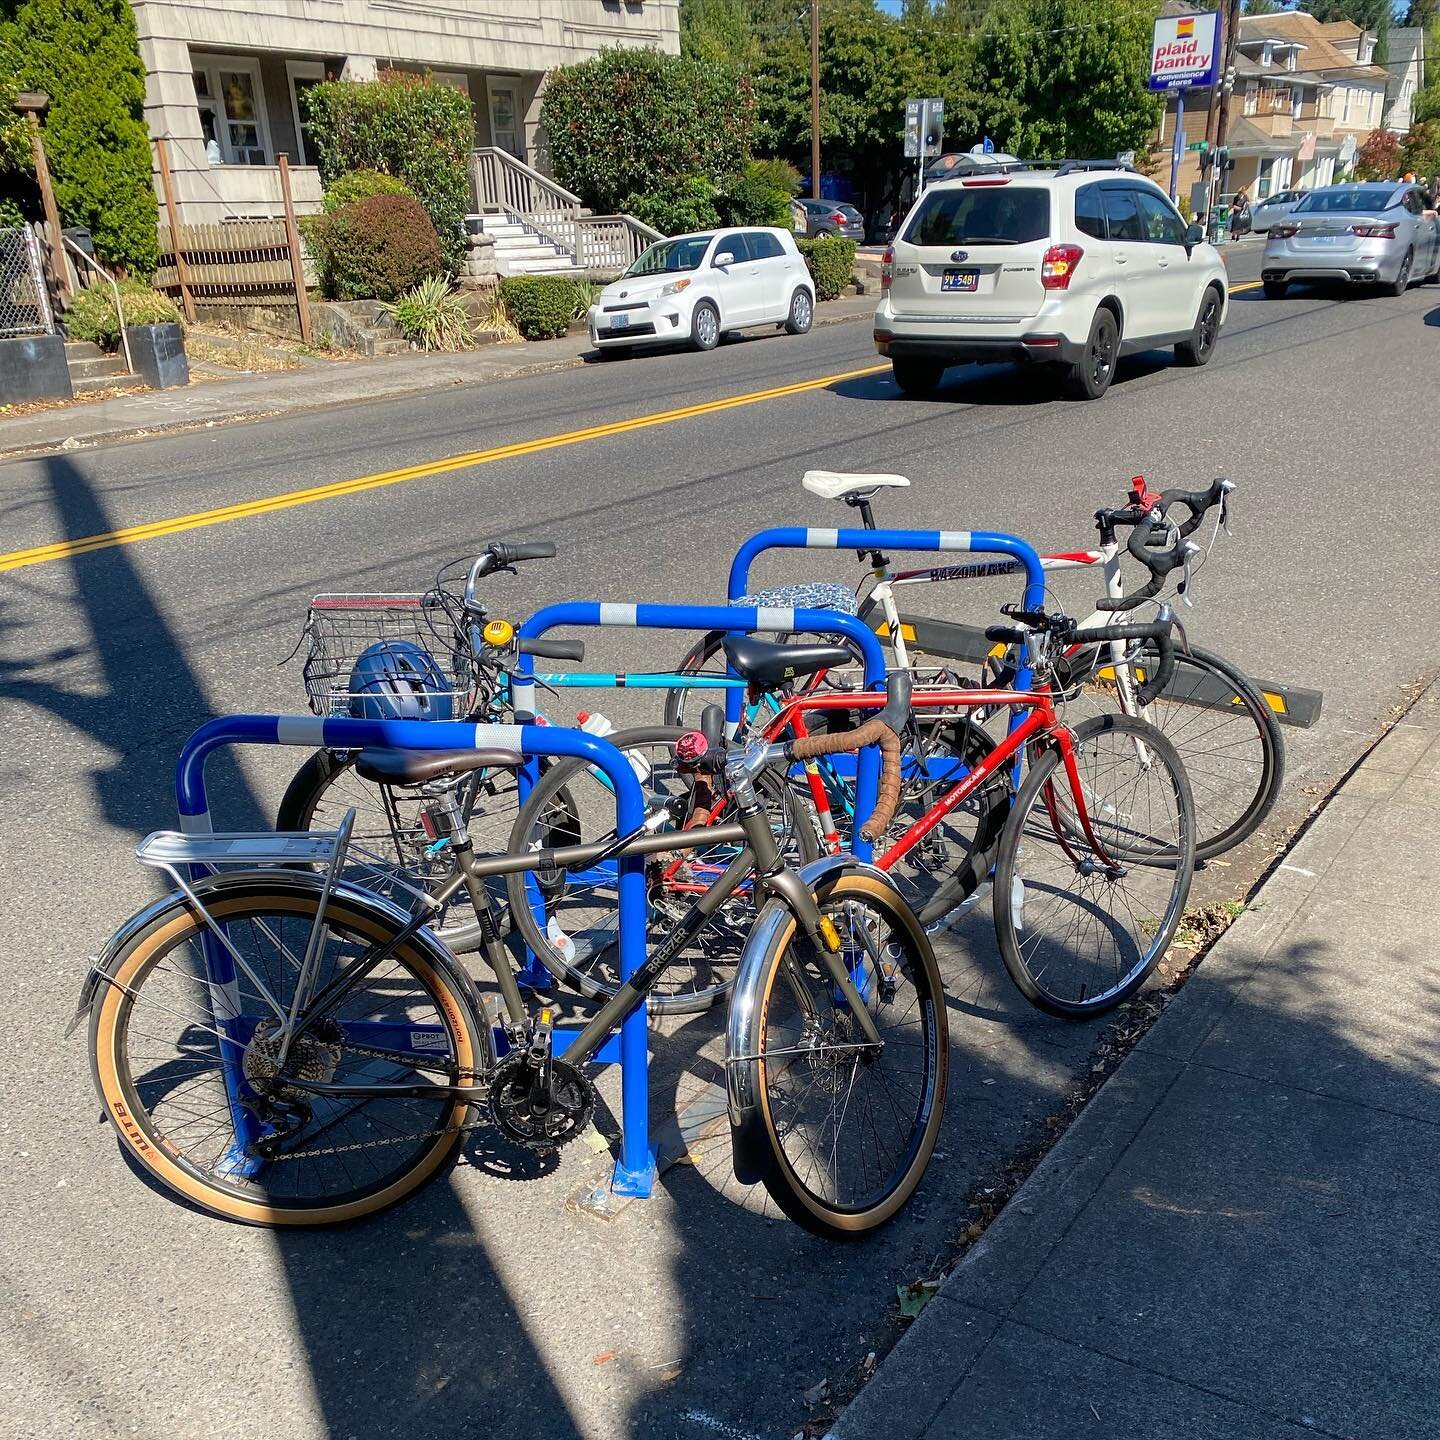 Great to see our newly installed Quantum bike racks were in full use yesterday for the Belmont Street Fair!  #buildingcommunity #martialarts #portlandoregon @quantum_seattle @quantum_sf